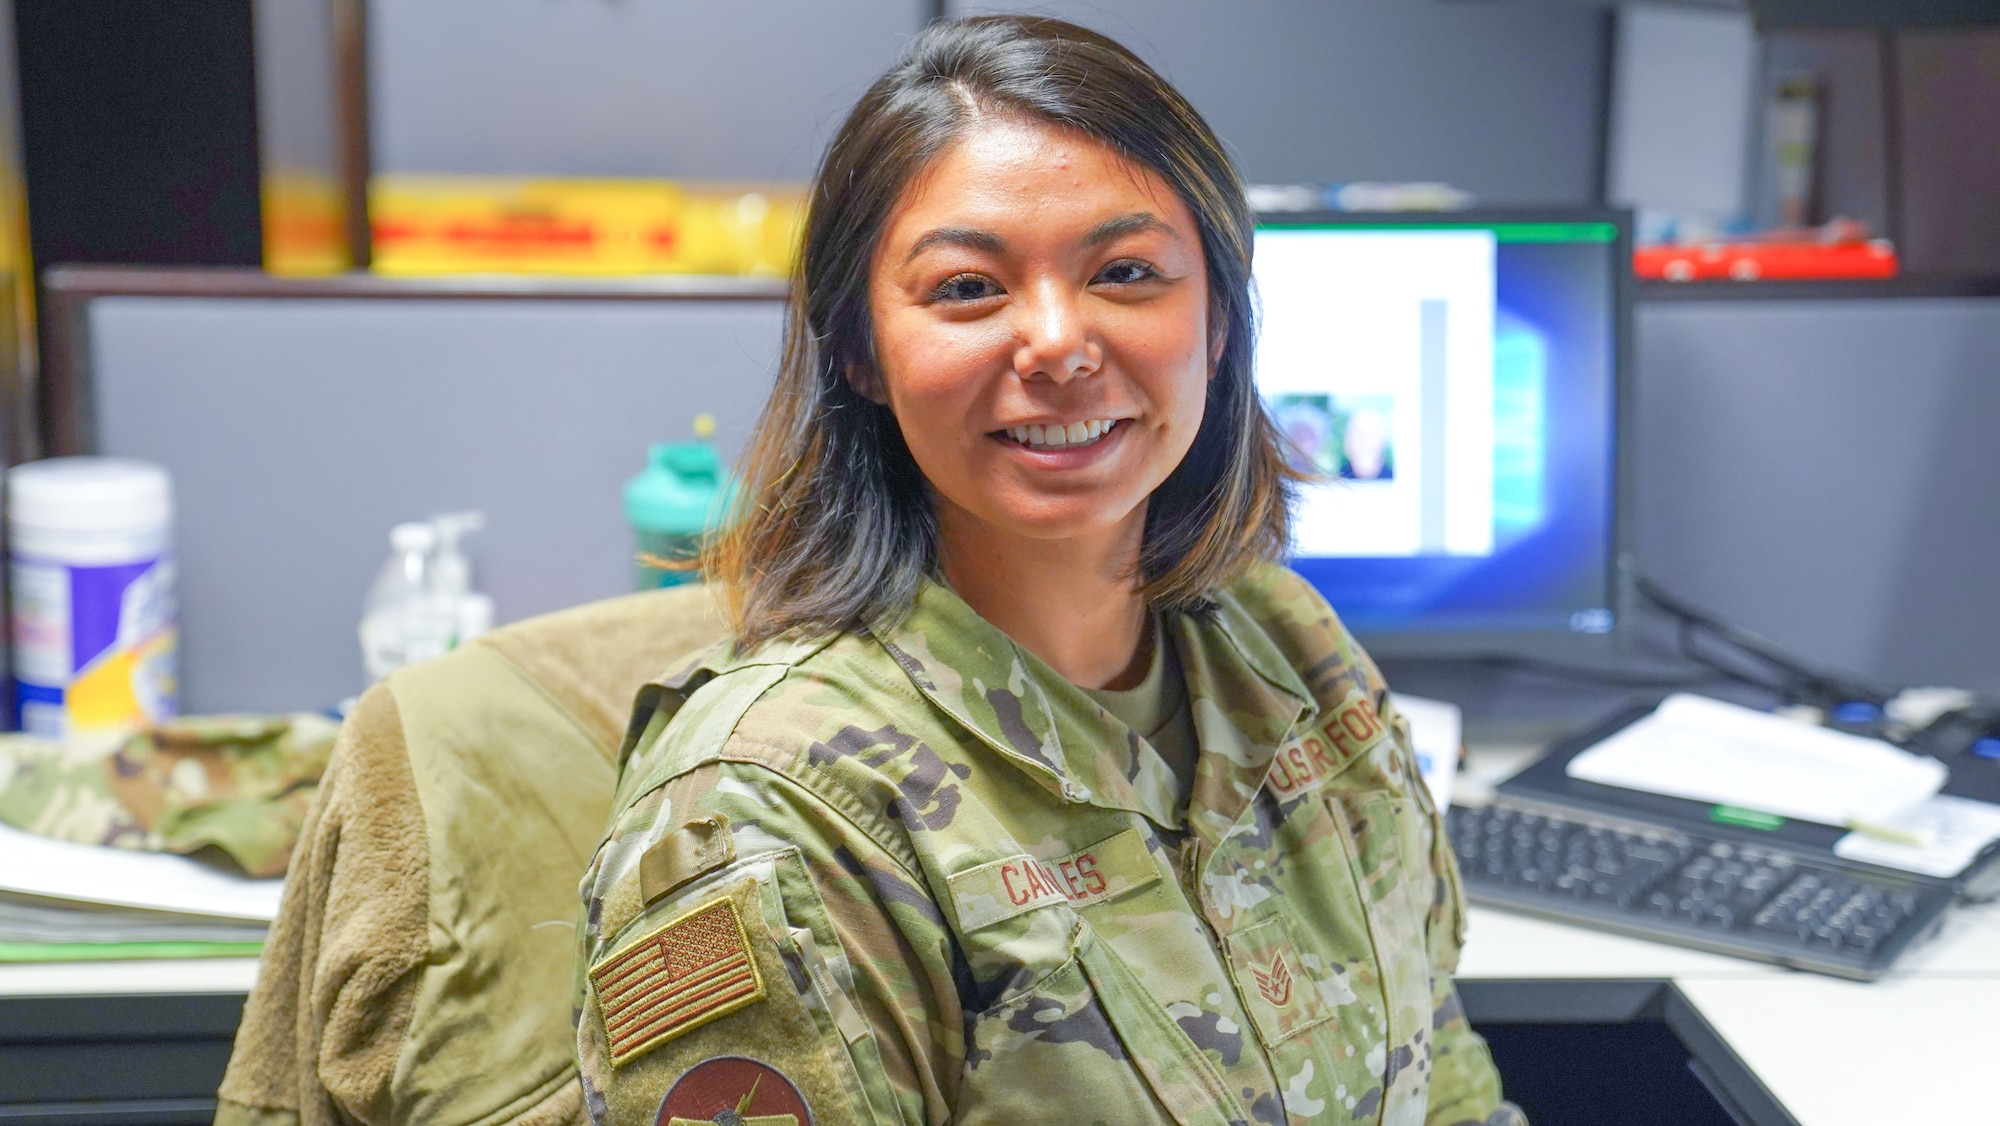 U.S. Air Force Staff Sgt. Lizzully Canales-Acuna, 335th Training Squadron instructor, poses for a photo at Keesler Air Force Base, Aug. 30, 2022. Canales-Acuna shared her story in recognition of National Hispanic Heritage Month, celebrated September 15 to October 15. (U.S. Air Force photo by Airman 1st Class Elizabeth Davis)